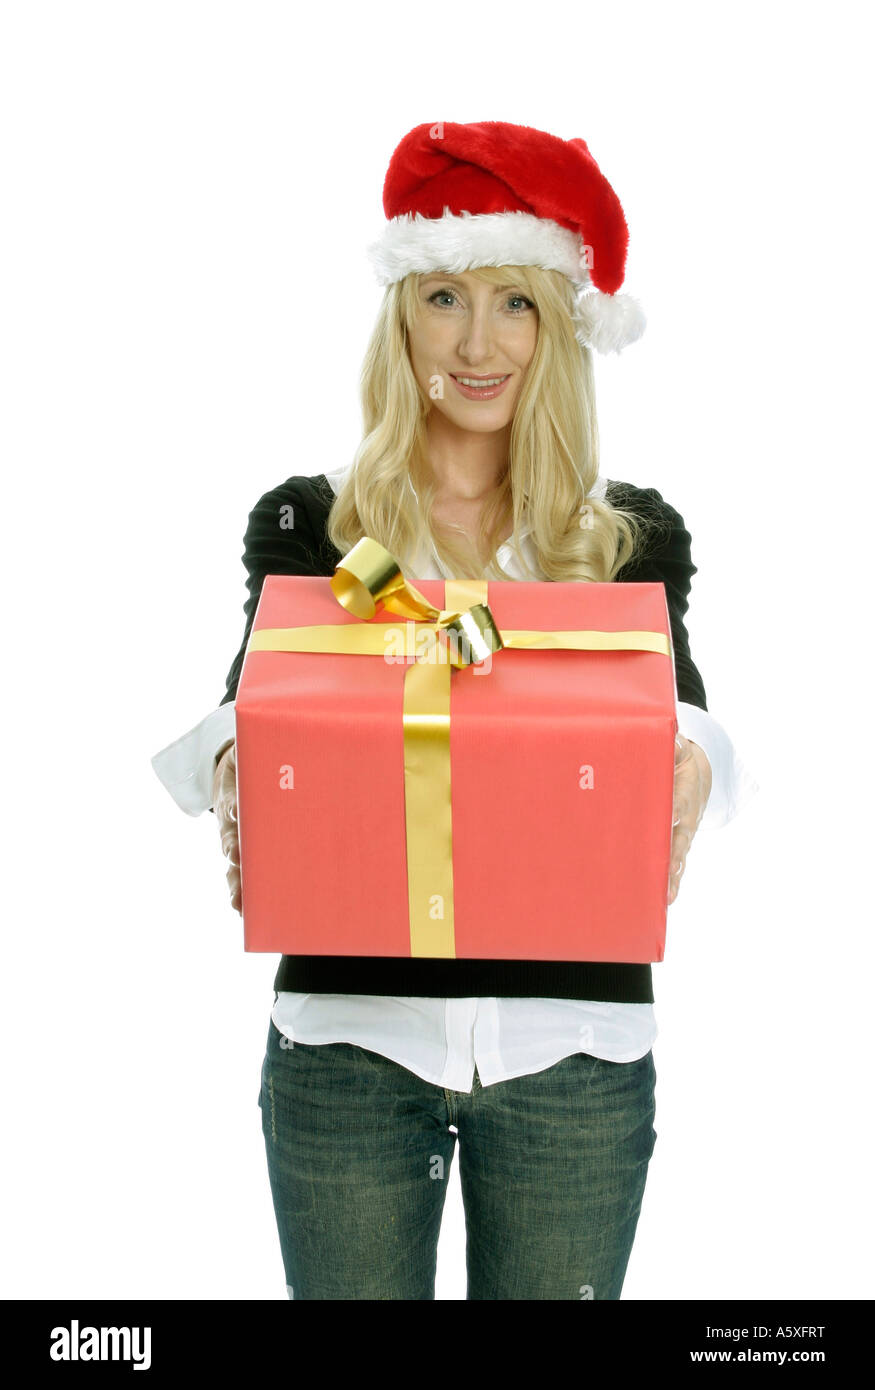 Mid adult woman wearing Santa hat and holding Christmas Gift portrait Banque D'Images